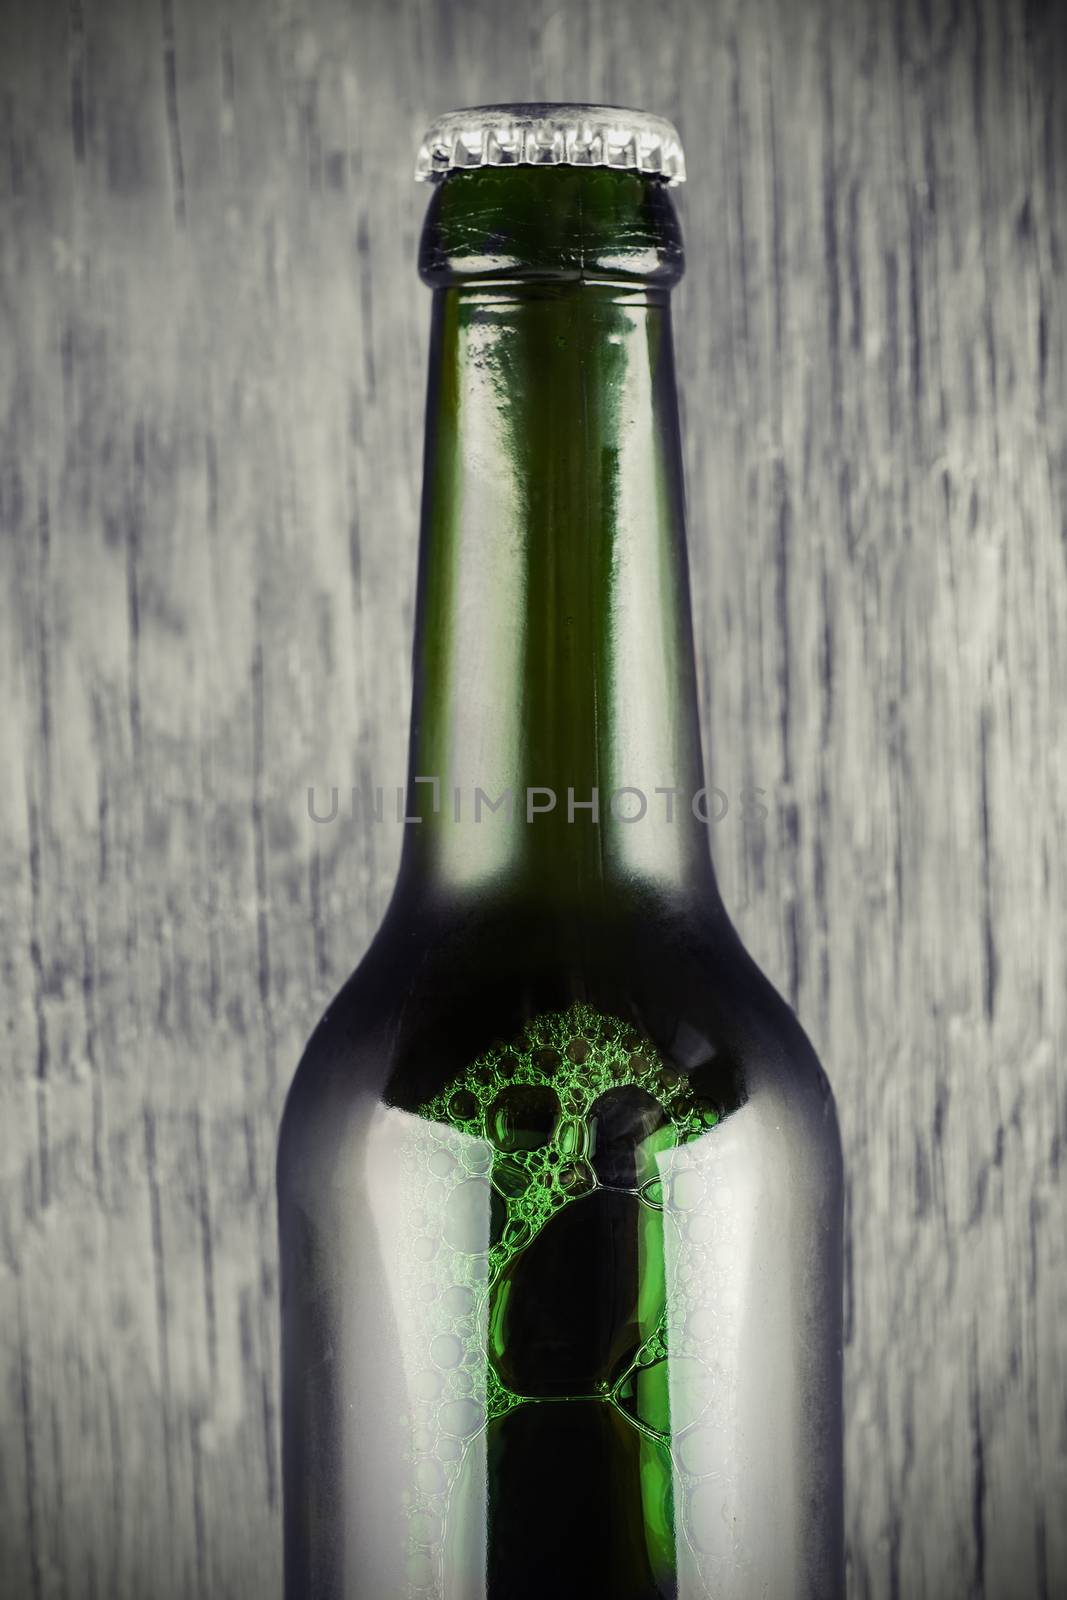 glass bottle of beer close-up on a wooden background